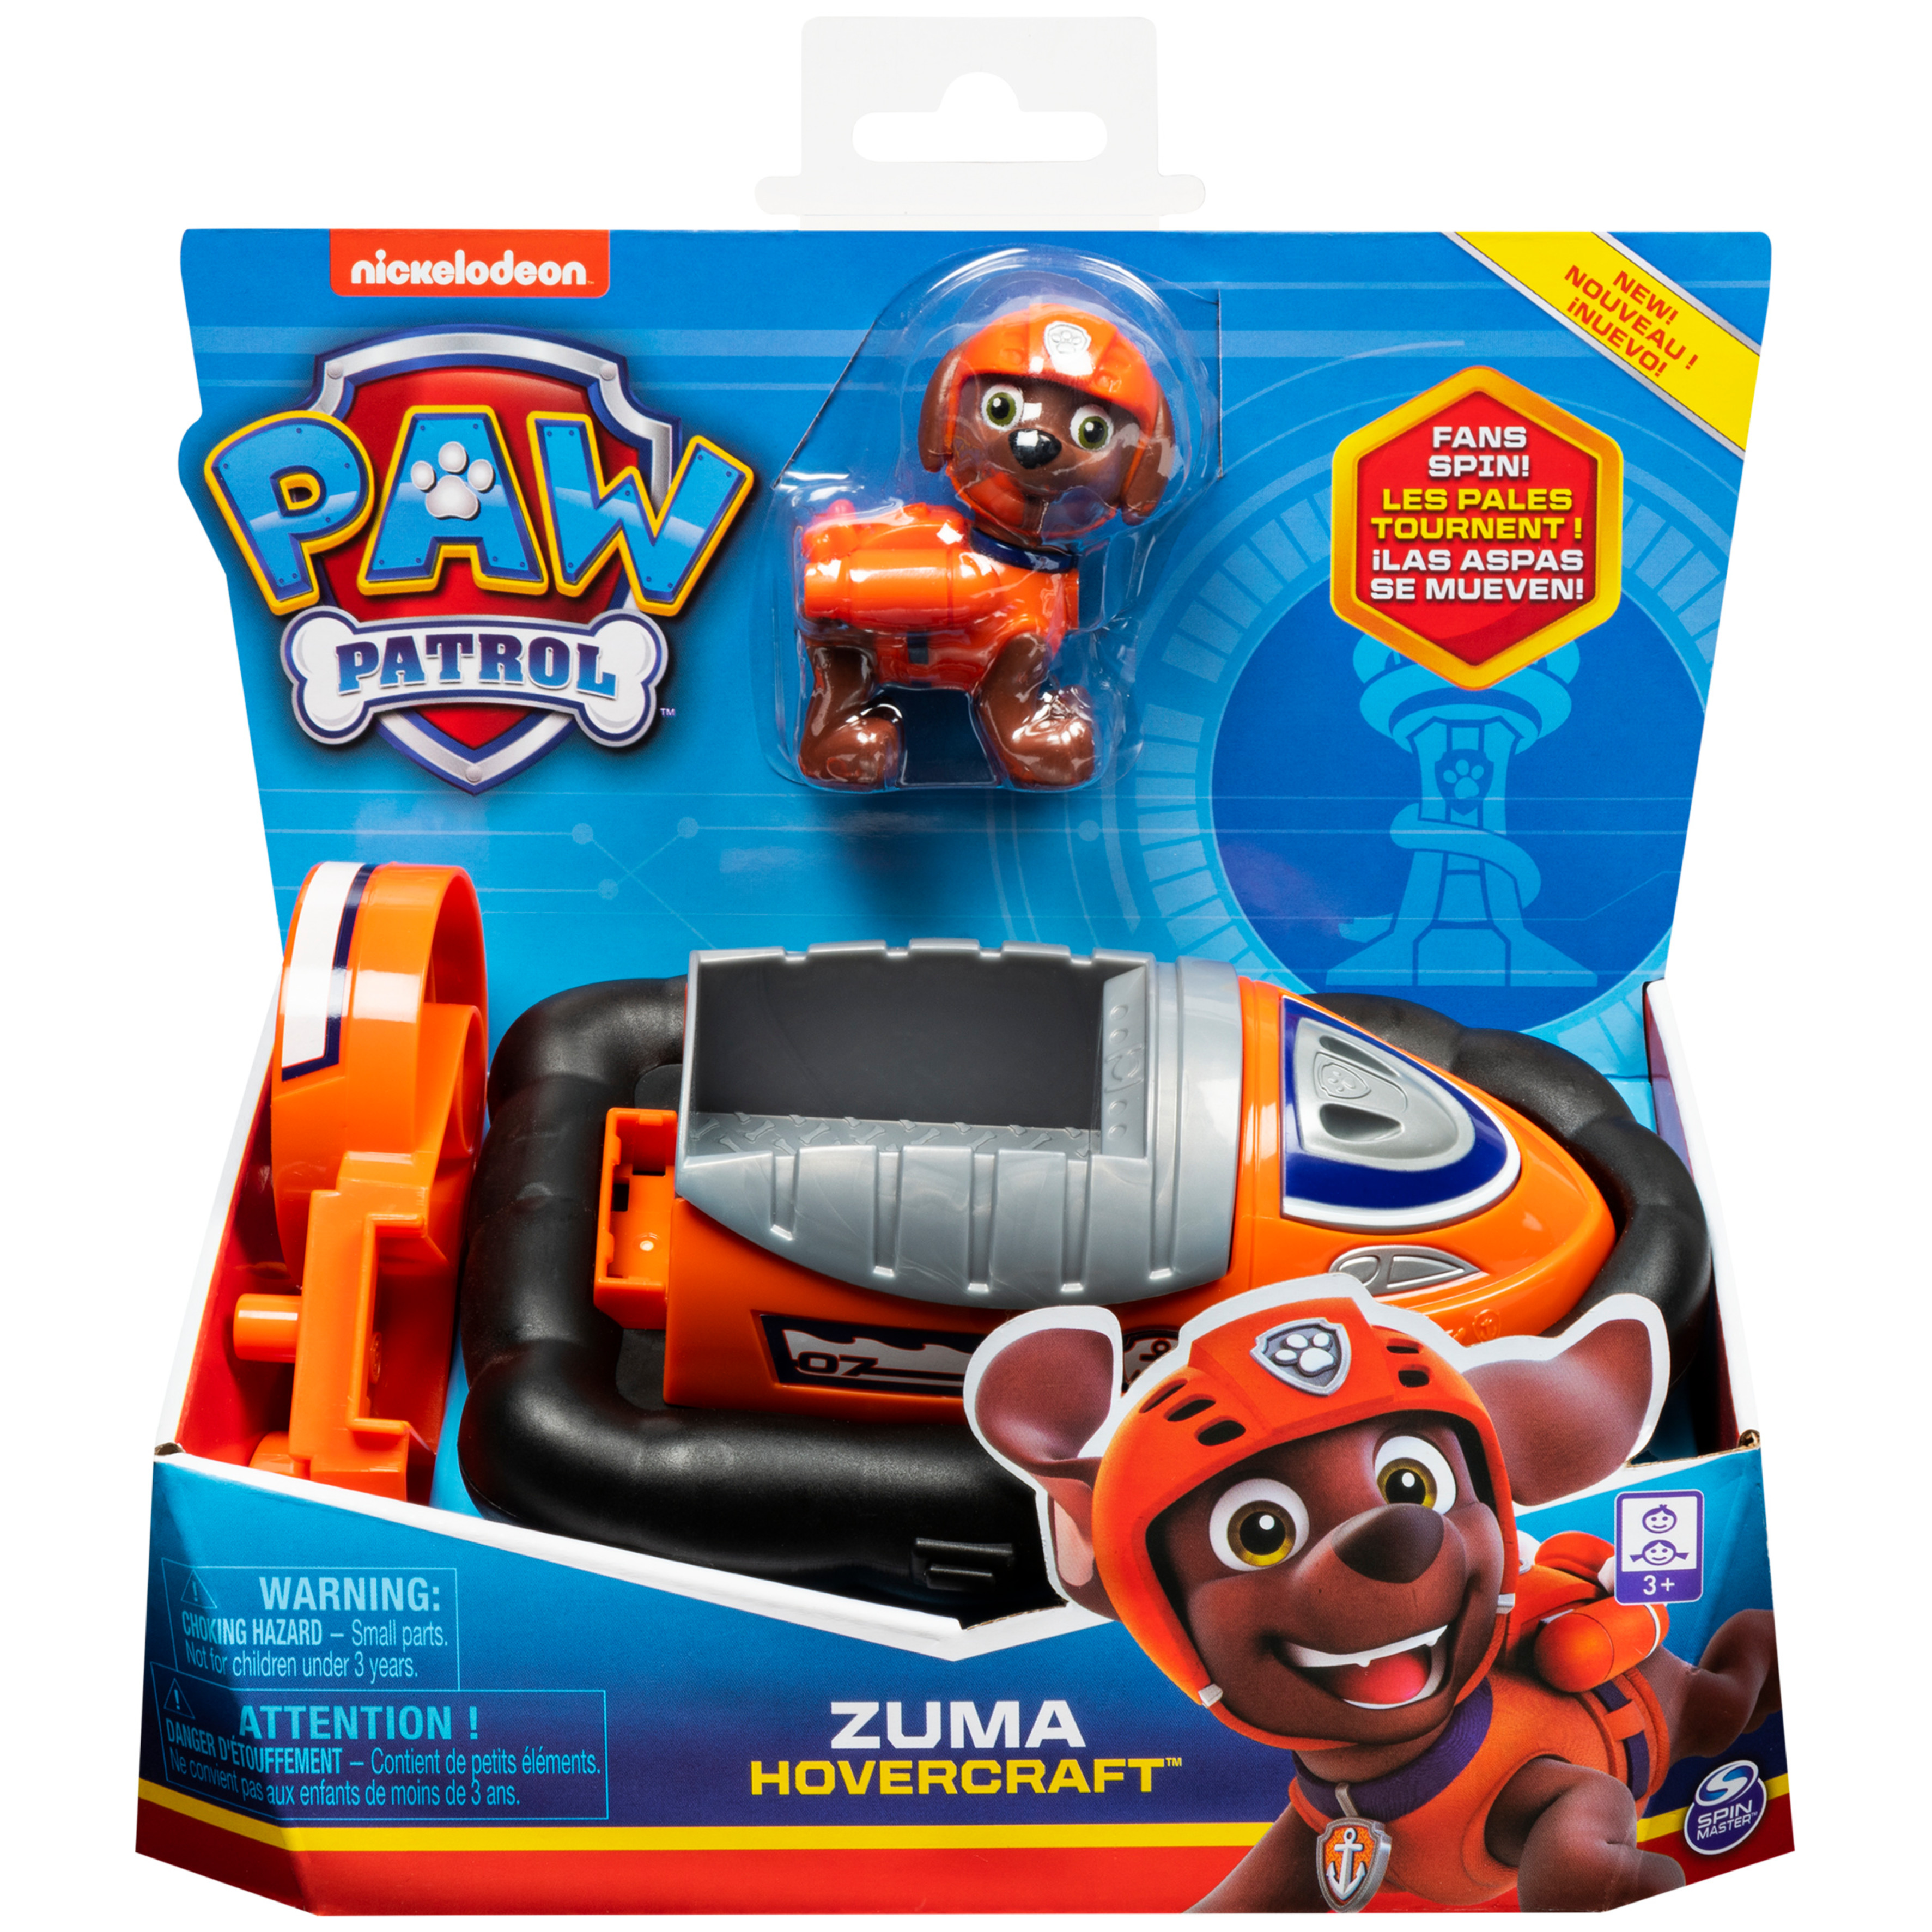 PAW Patrol, Zuma’s Hovercraft Vehicle with Collectible Figure, for Kids Aged 3 and Up - image 2 of 6